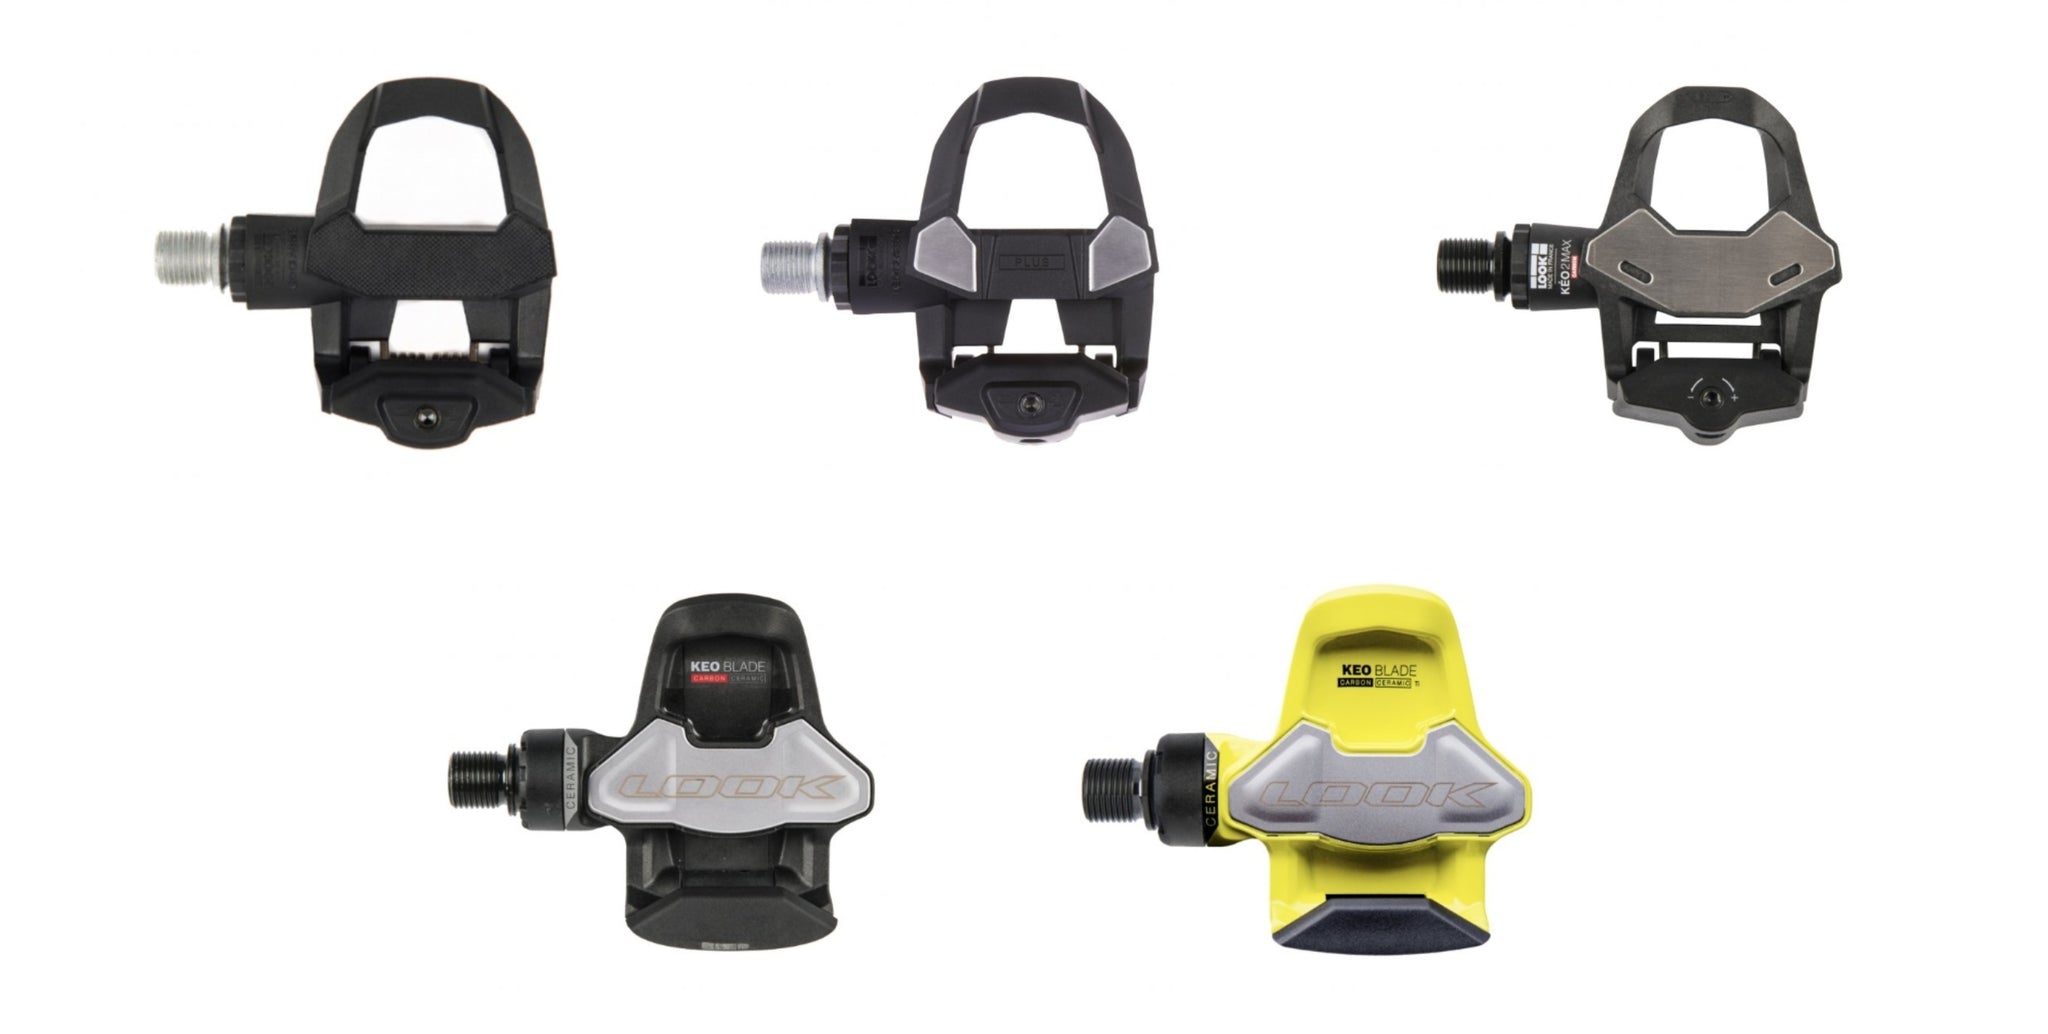 Look Keo clipless road bike pedals